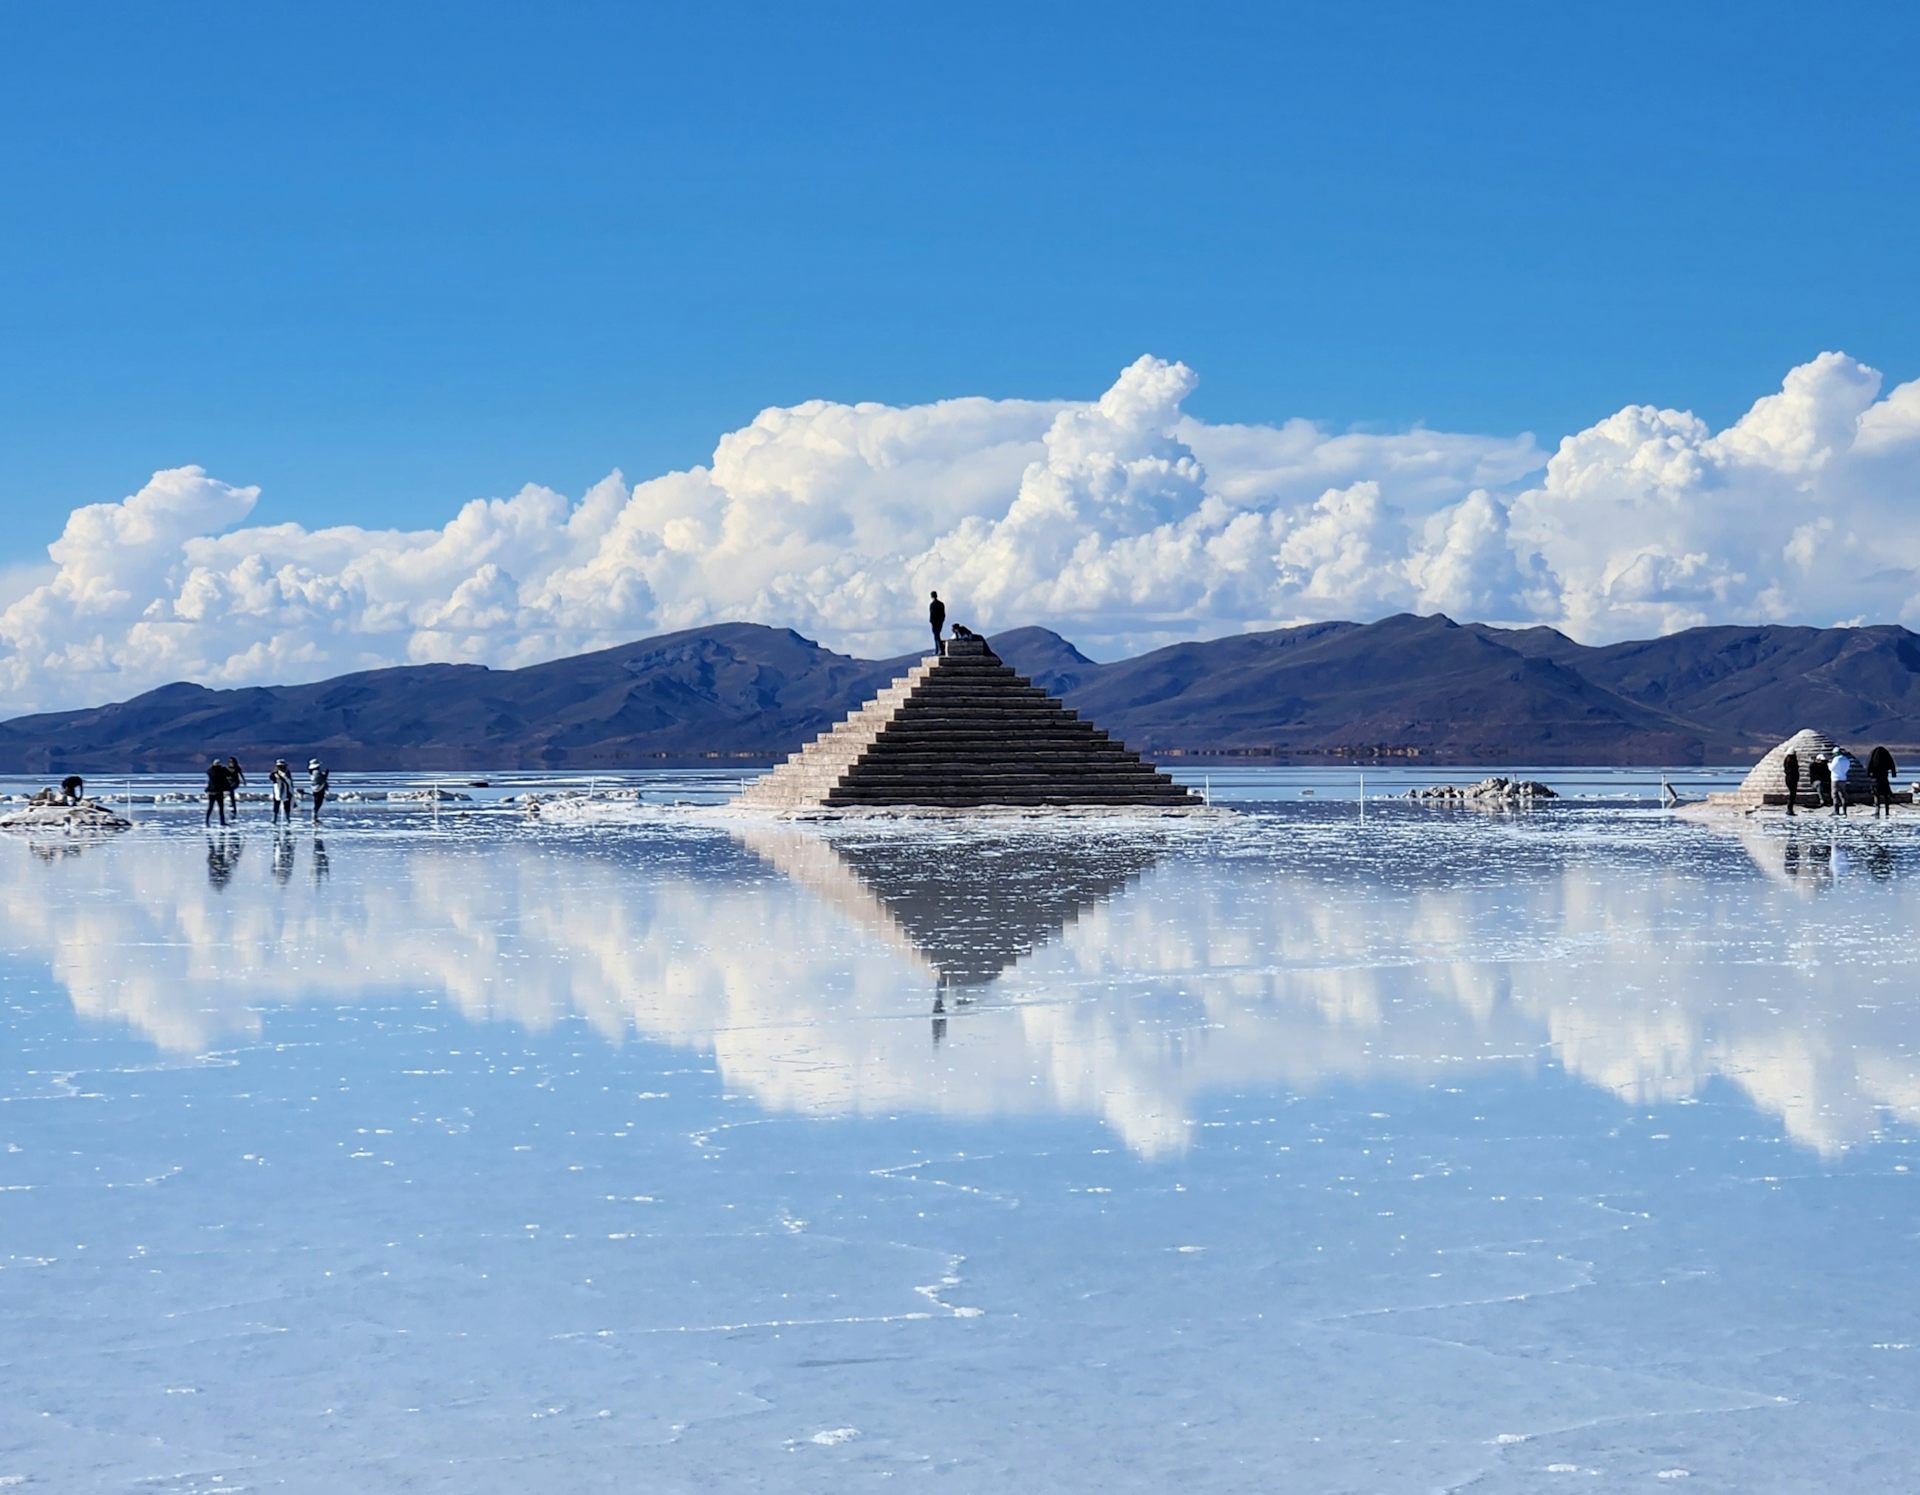 Raw Materials, or Sacred Beings? Lithium Extraction Puts Two Worldviews into Tension